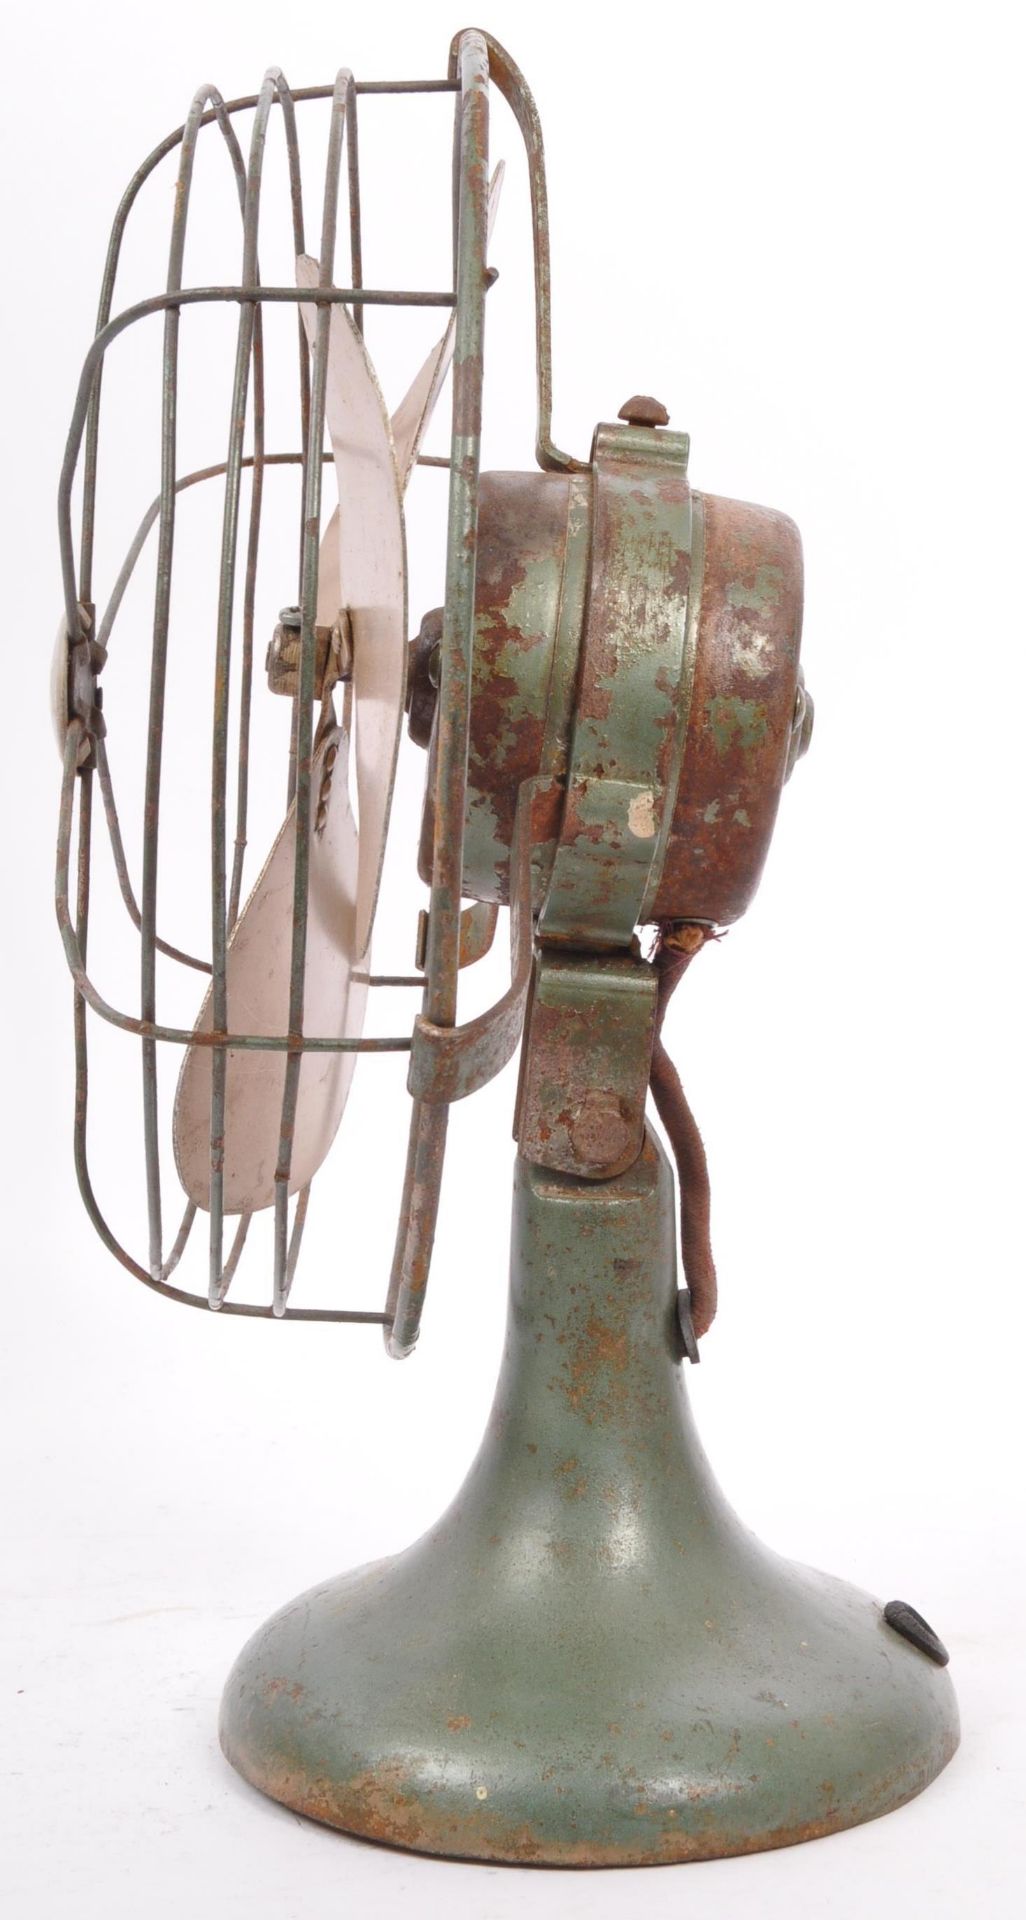 VINTAGE RETRO INDUSTRIAL ELECTRONIC DESK FAN BY H FROST - Image 2 of 5